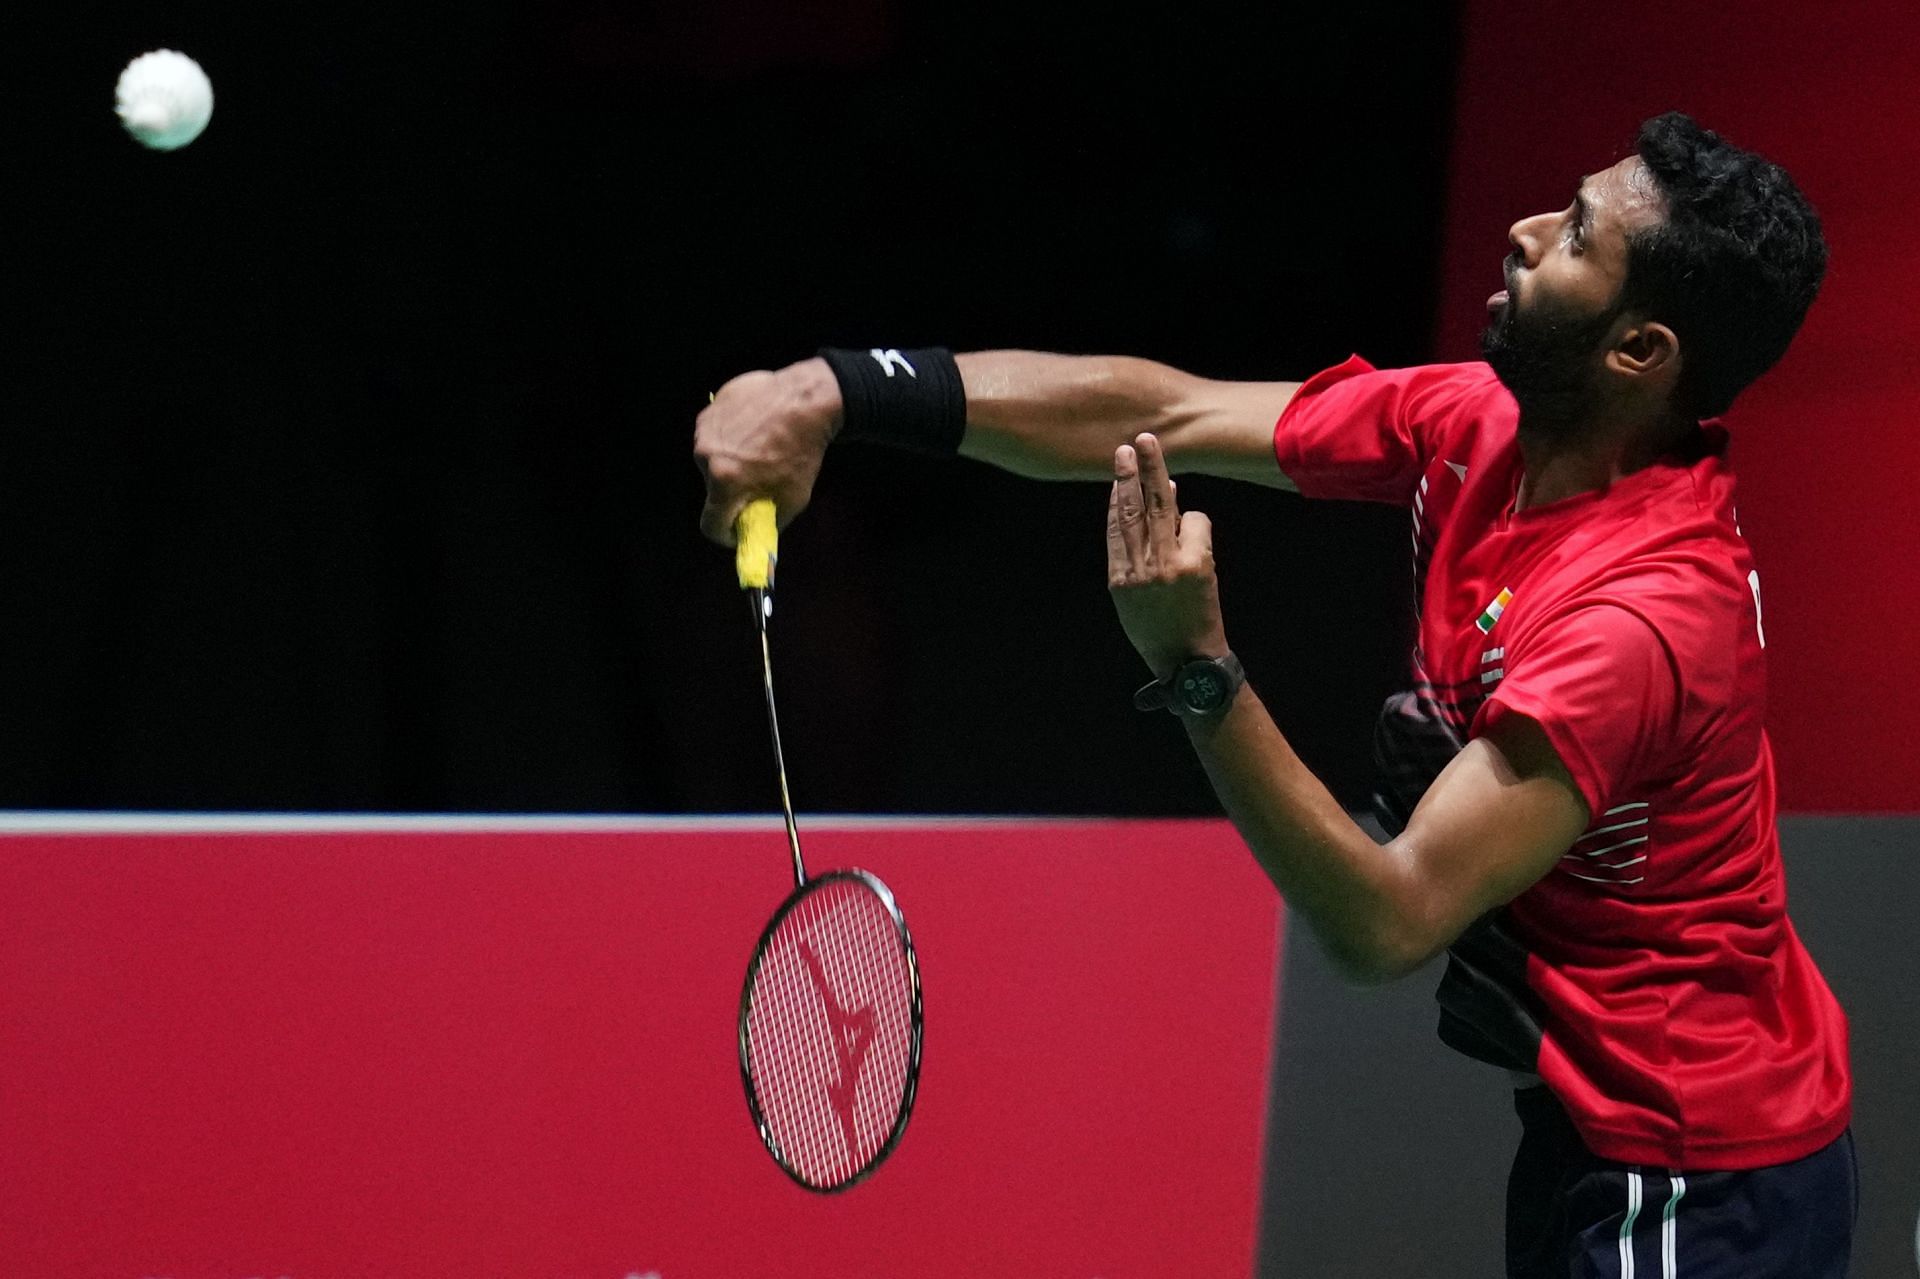 BWF World Tour Finals 2022 HS Prannoy vs Kodai Naraoka preview, head-to-head, prediction, where to watch and live streaming details